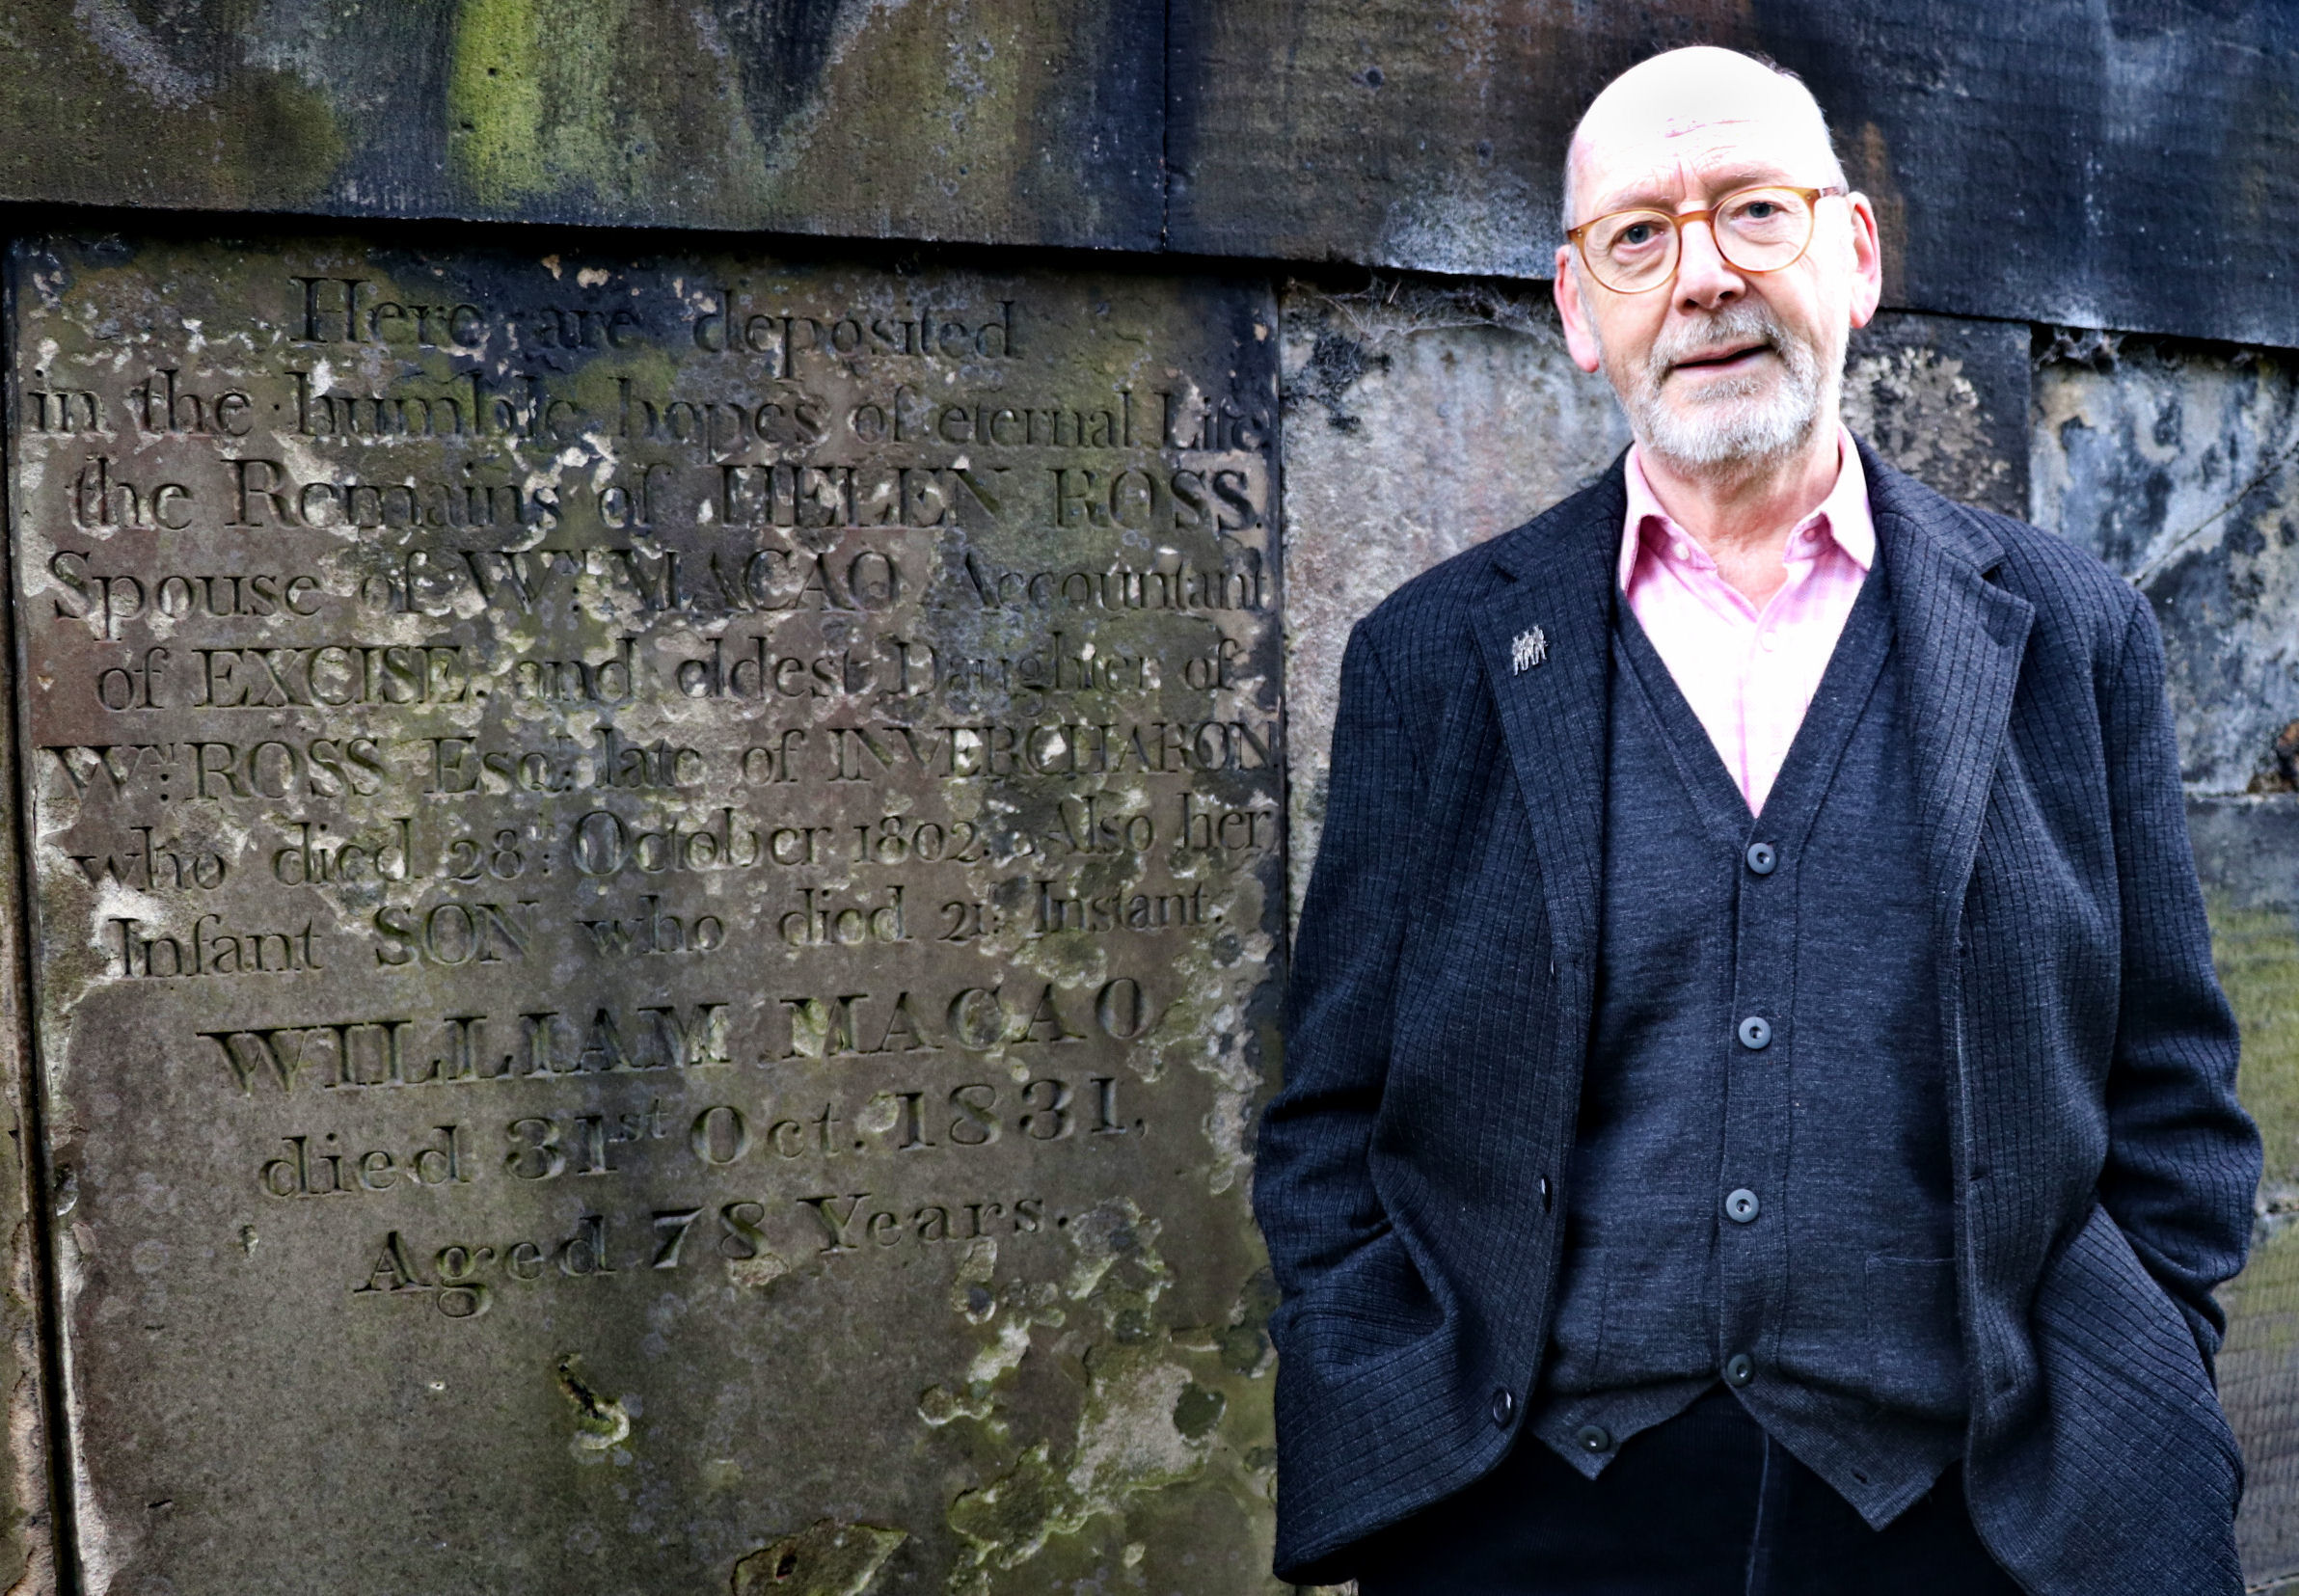 Barclay Price standing next to the gravestone of William Macao